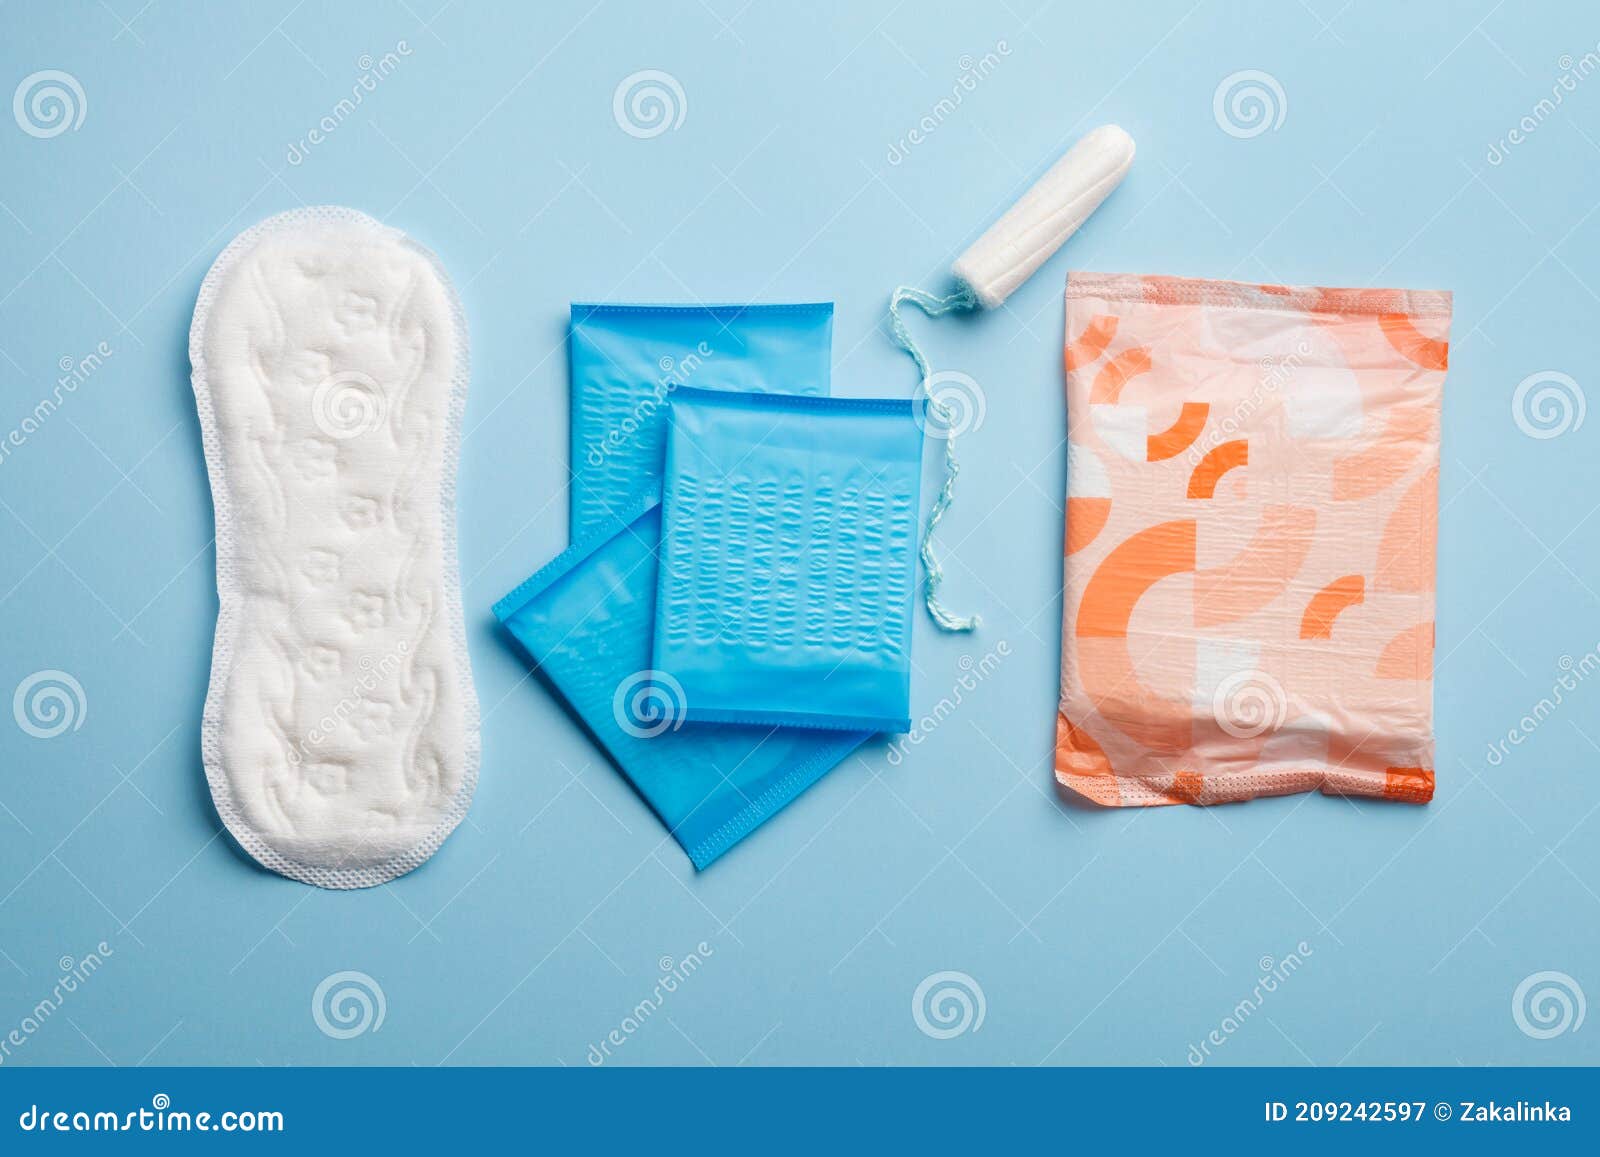 menstruation products, woman intimate hygiene, sanitary pads and tampon